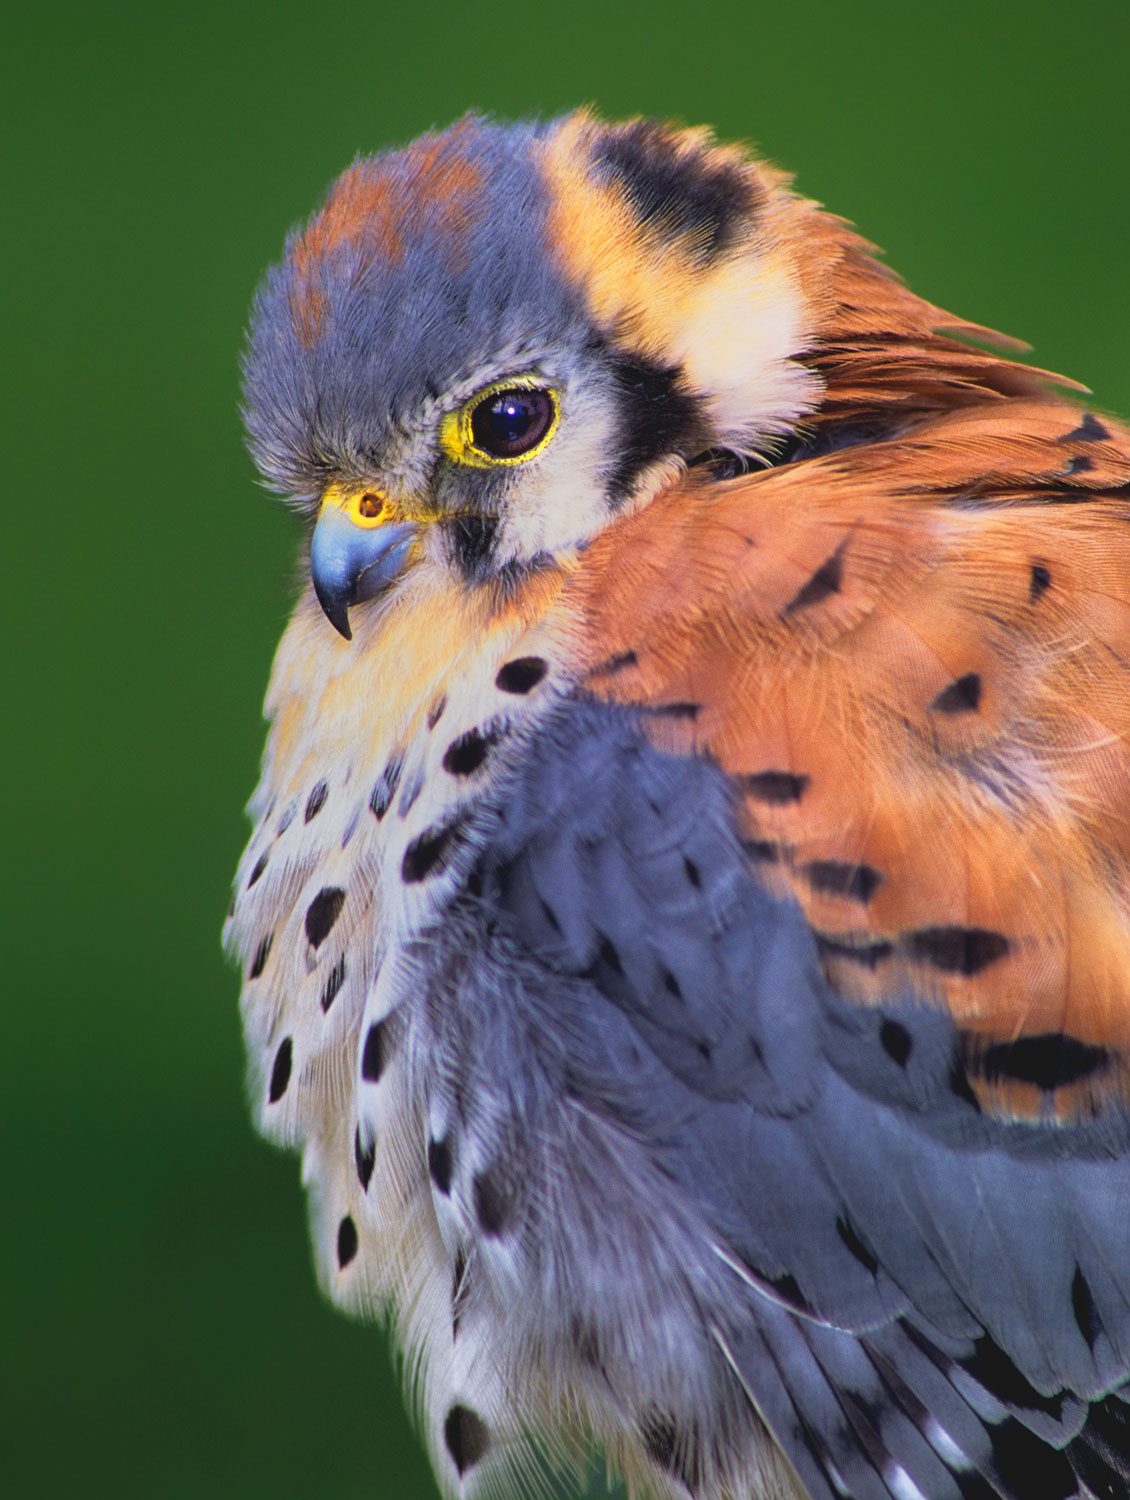 Orchard owners on Michigan’s Leelanau Peninsula have put up kestrel nest boxes and have seen a significant decline in fruit losses to pests. The kestrel population on the peninsula has increased as well. Photo by Dave Welling